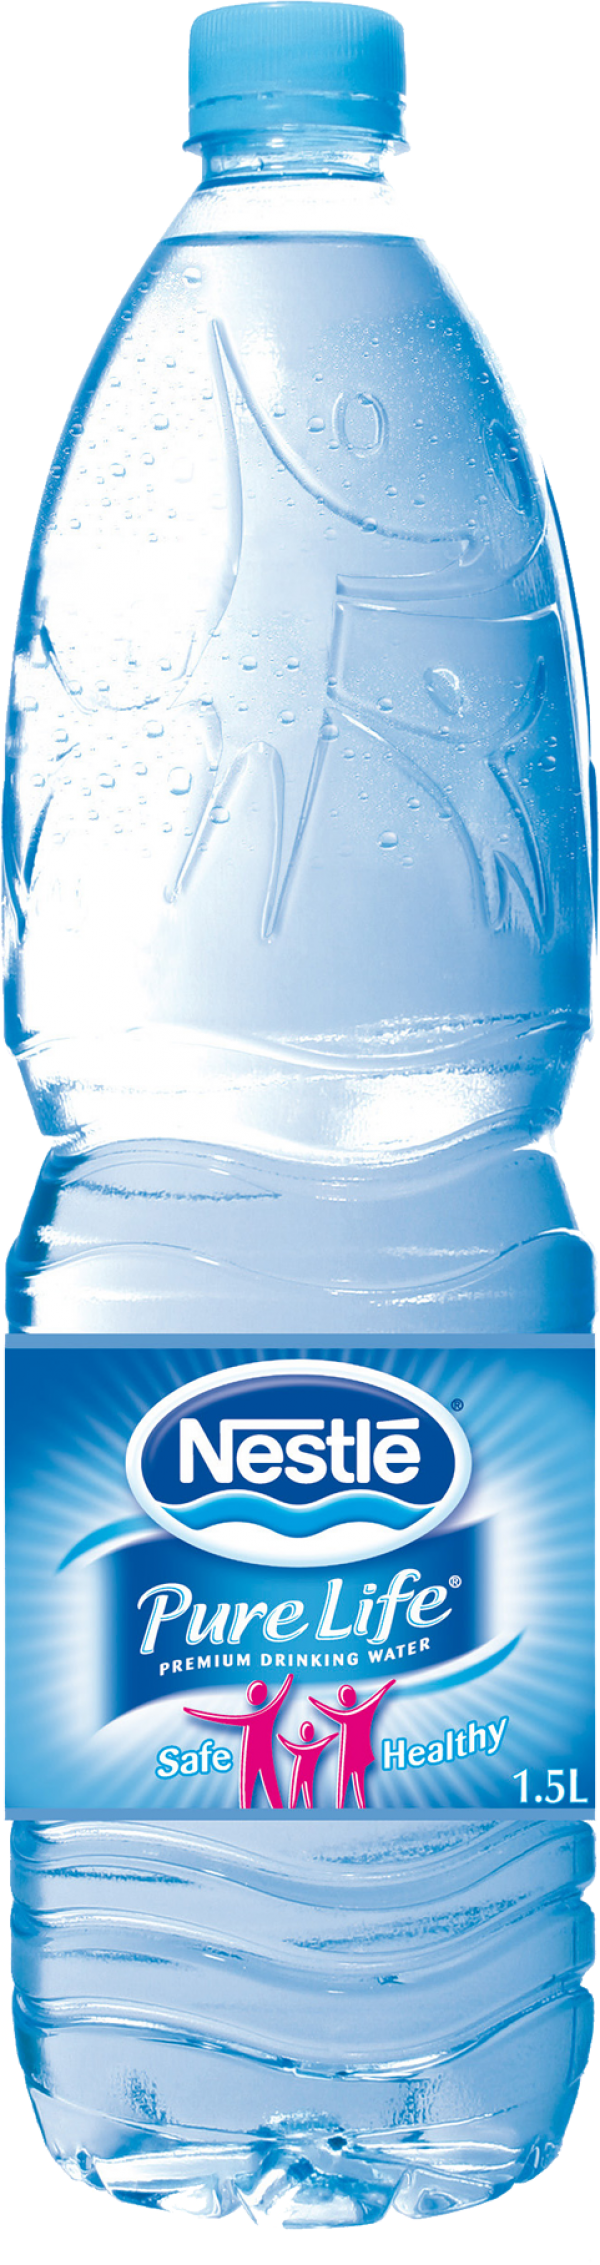 Water Bottle PNG Free Download 19